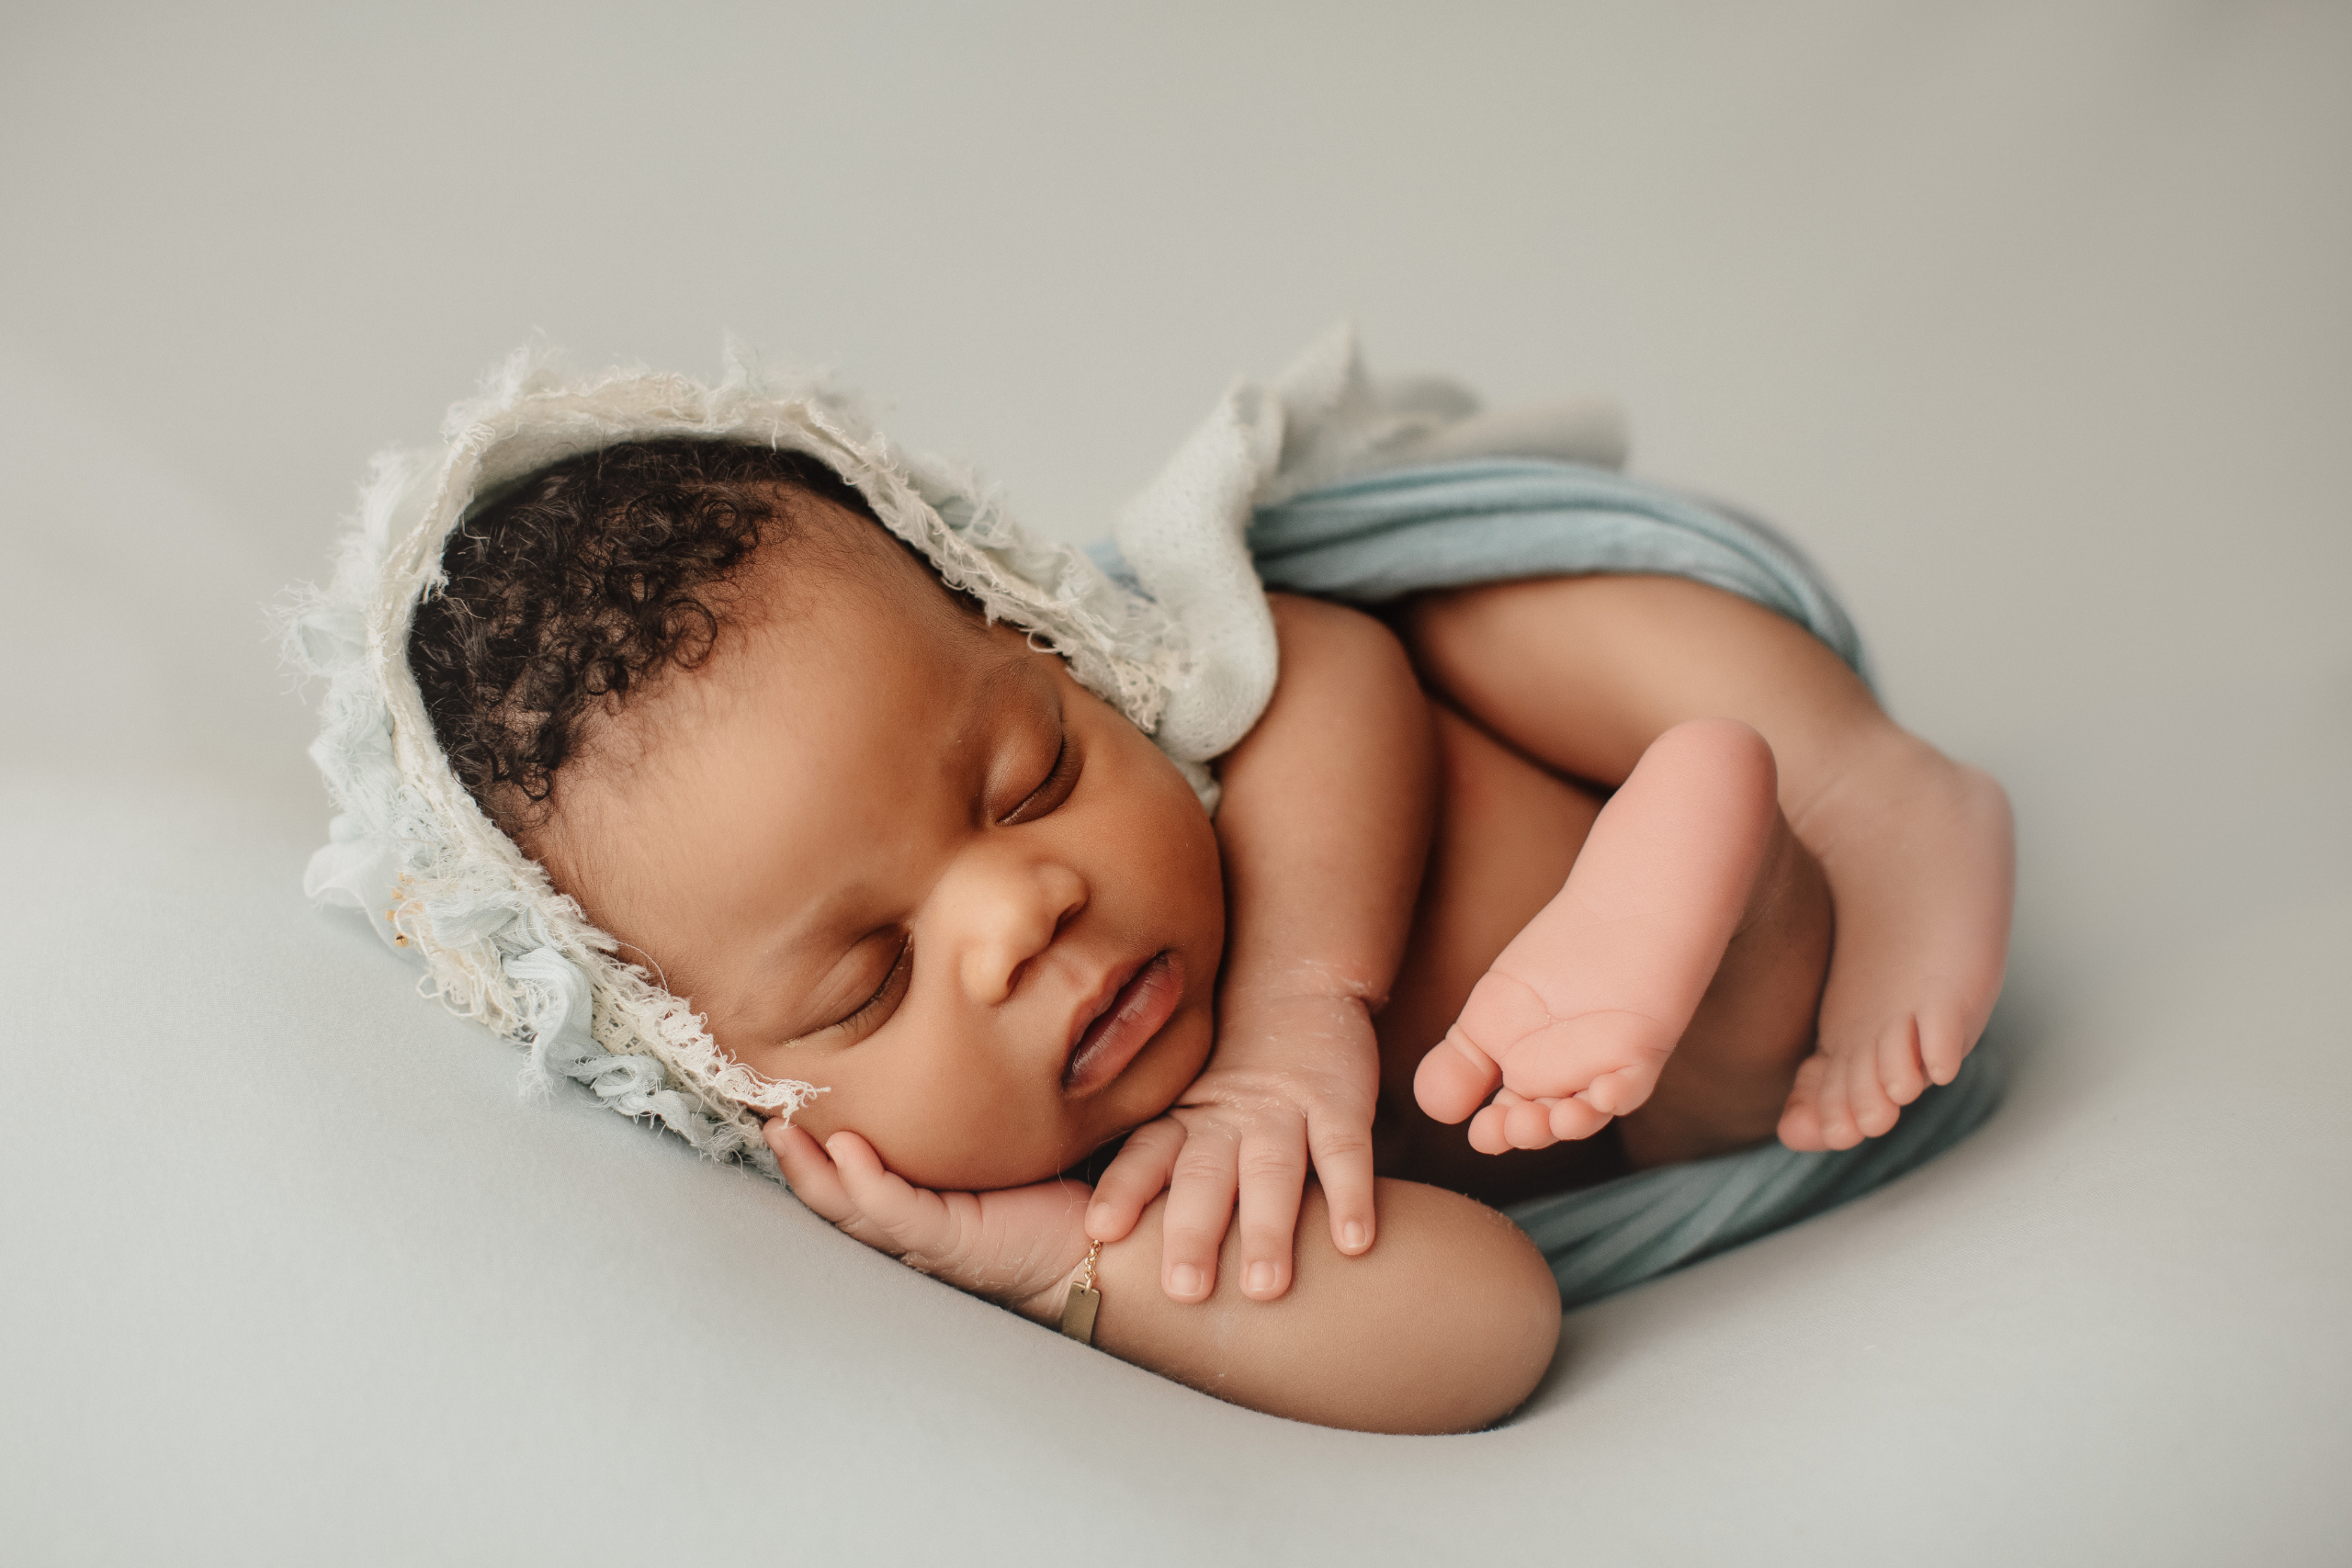 From American Academy Pediatrics: All babies cry. Most babies cry a lot from two weeks to two months of age. Some cry more than others, and some cry longer than others. For many new parents, crying is one of the most stressful parts of coping with a newborn. In some cases, extreme stress and a temporary lapse […]